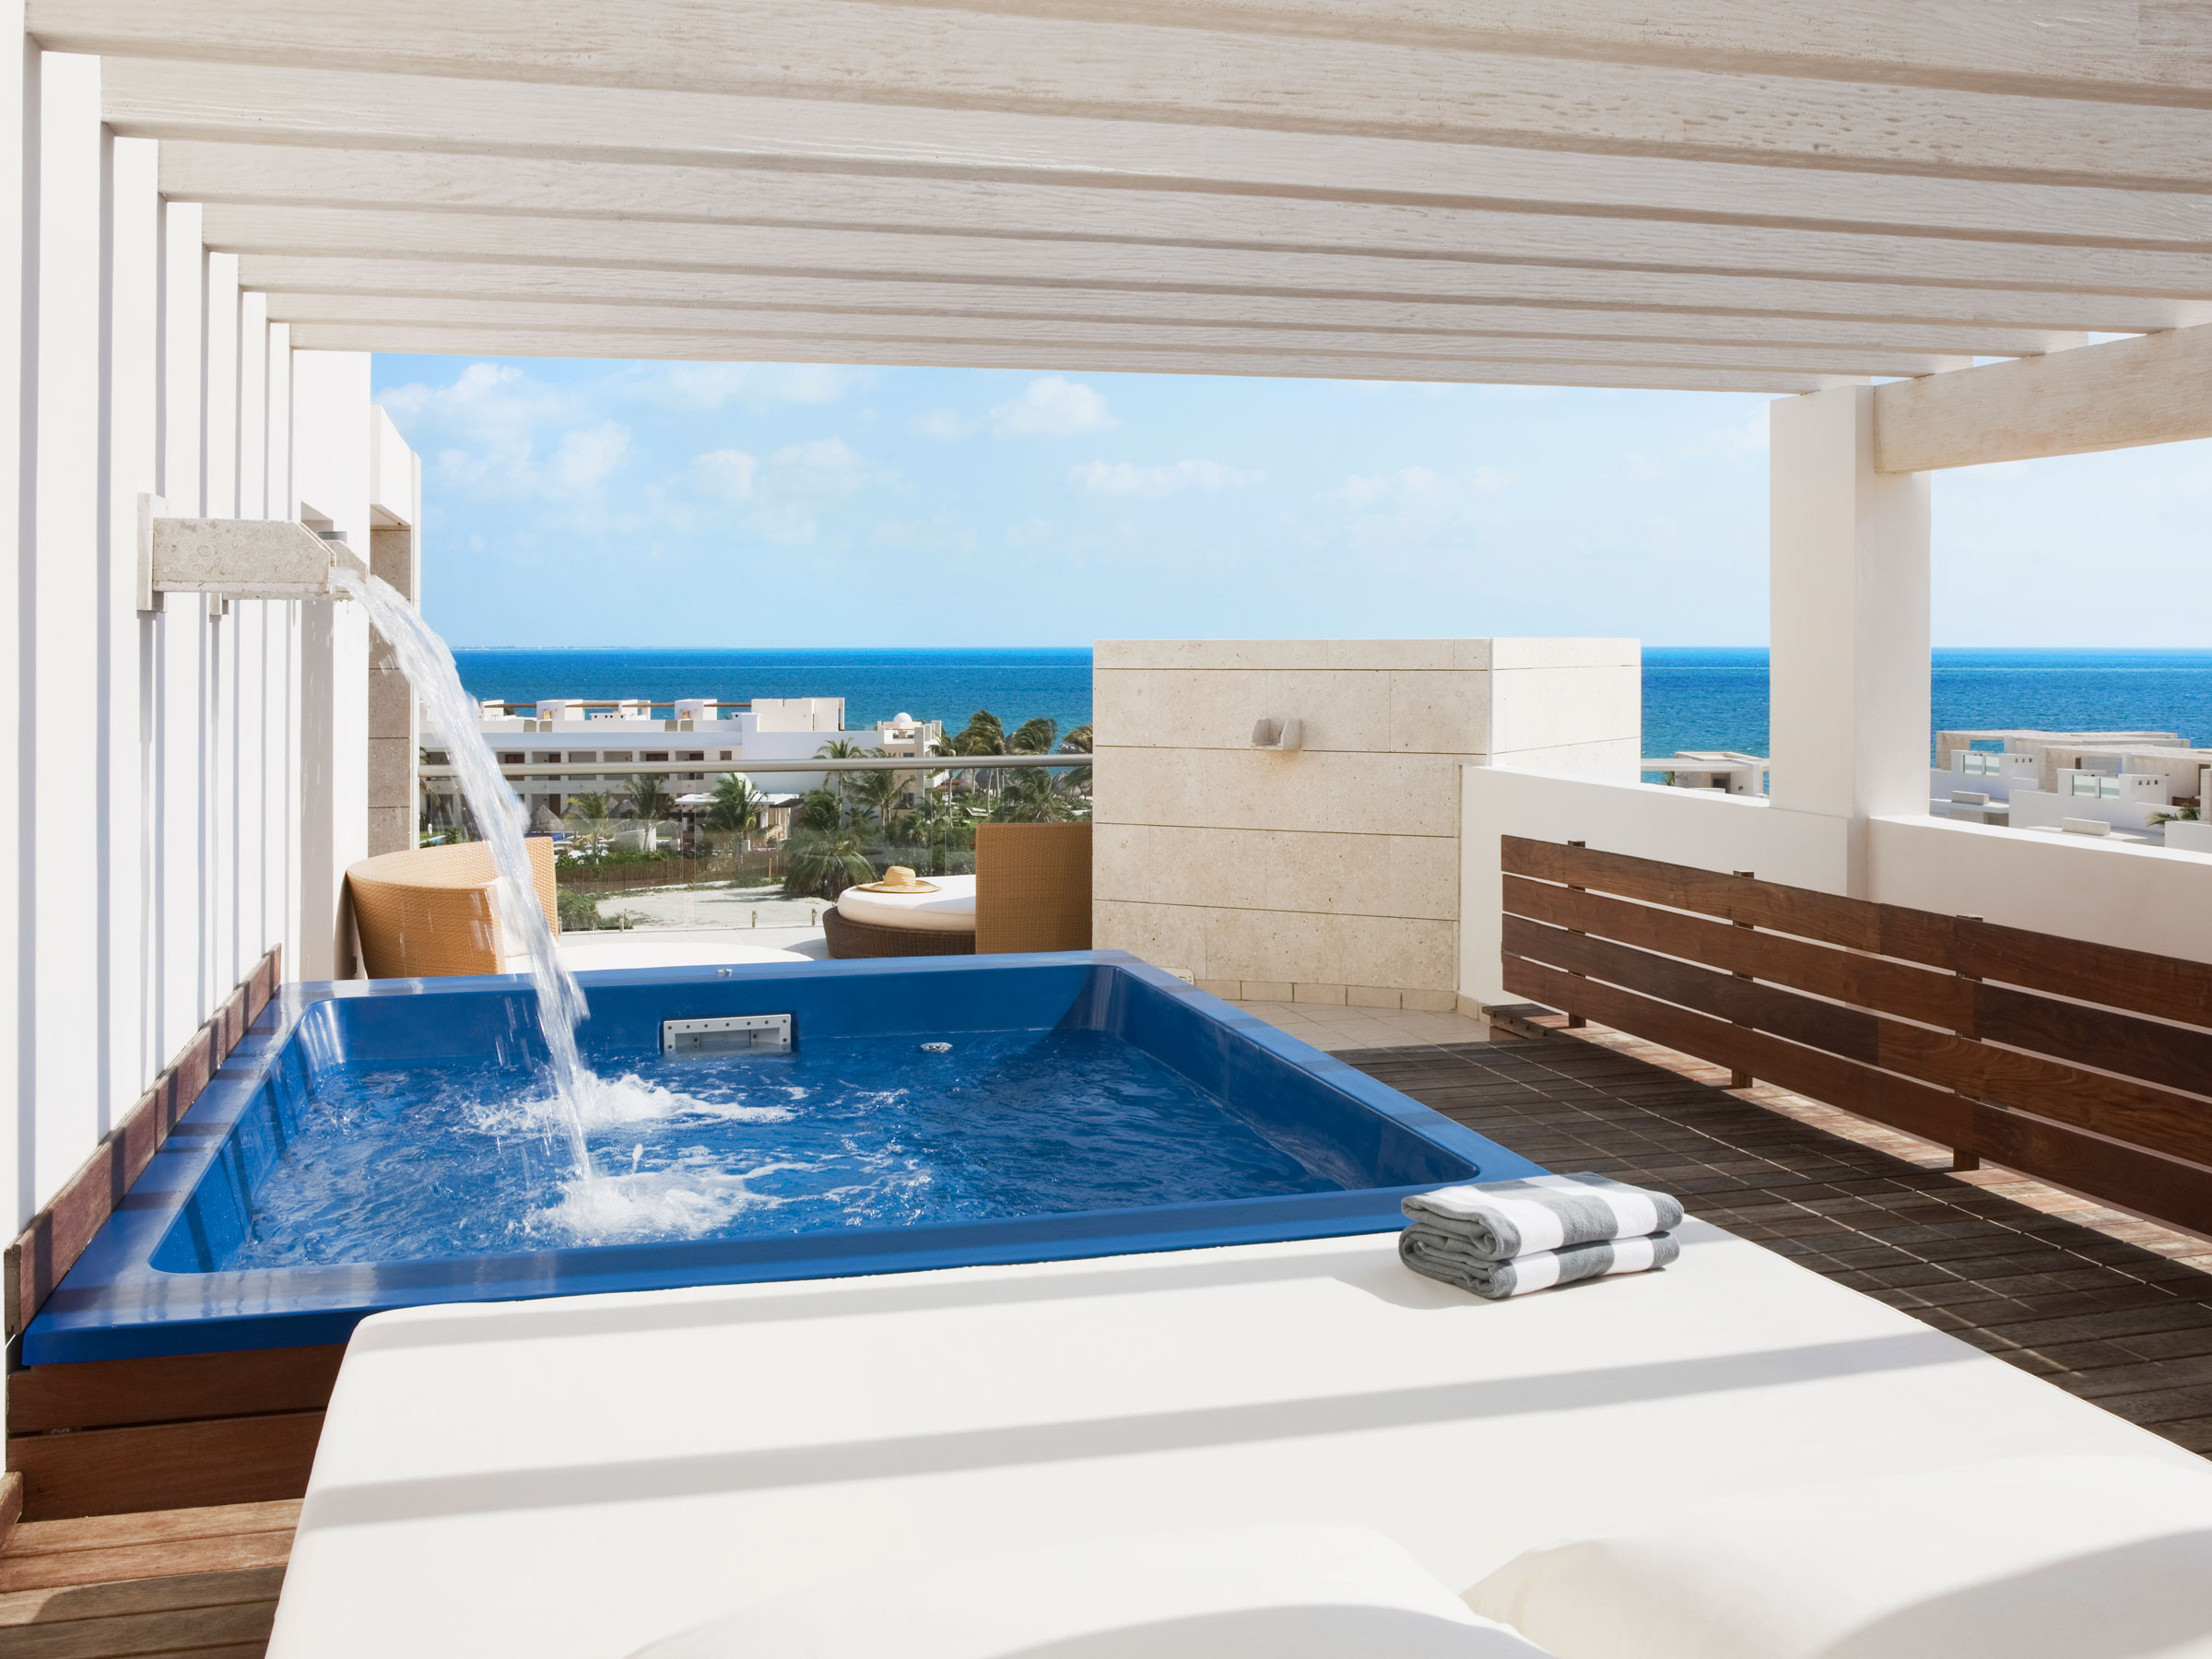 Penthouse Suite Pool in Cancun